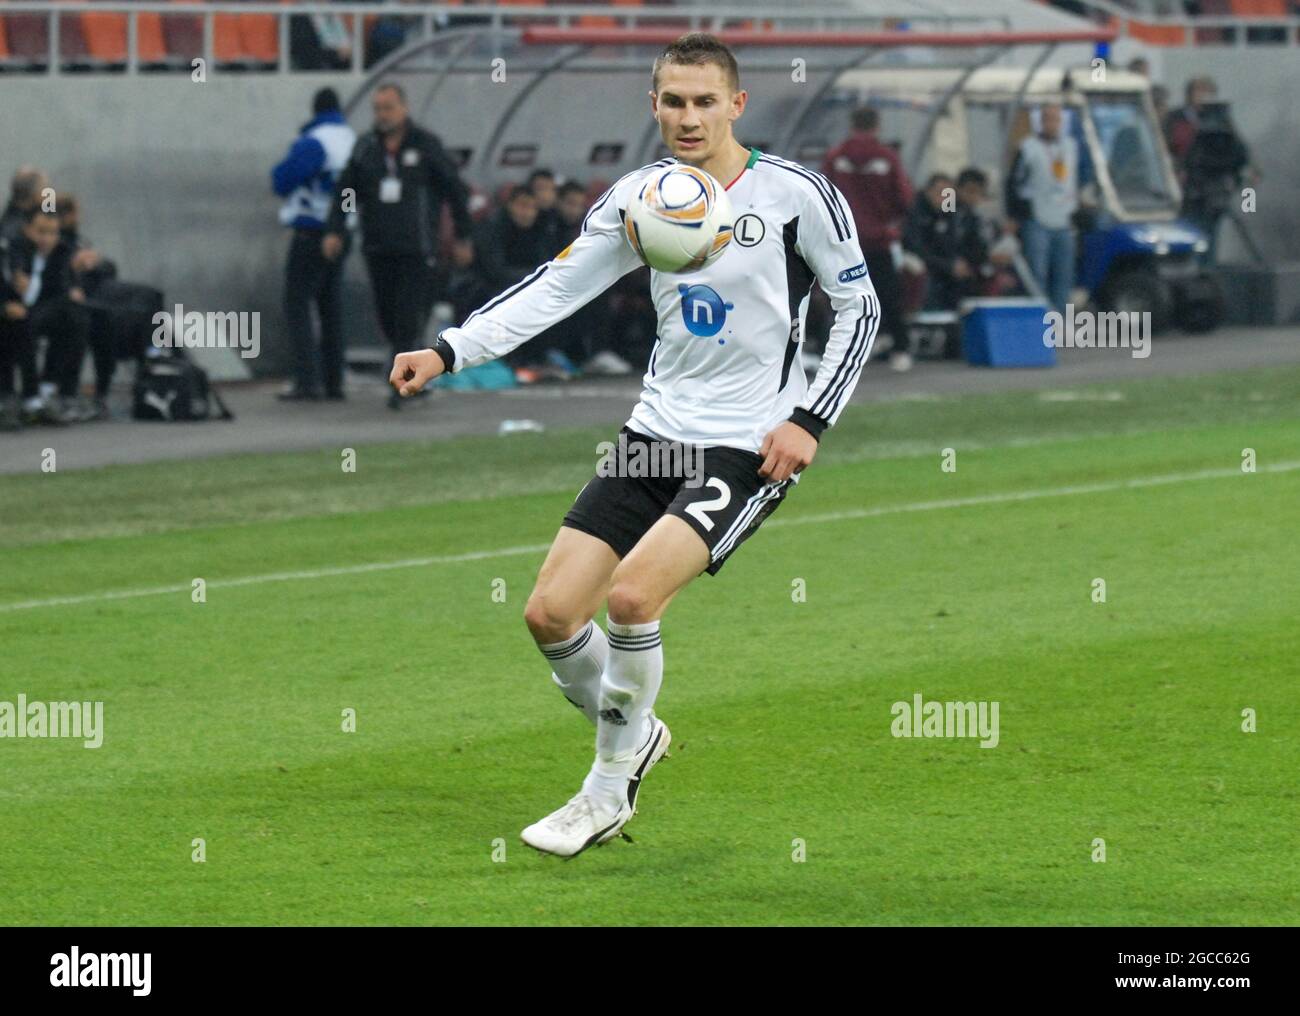 BUCHAREST, ROMANIA - OCTOBER 20, 2011: Artur Jedrzejczyk of Legia pictured during the UEFA Europa League Group C game between Rapid Bucuresti and Legia Warszawa at National Arena. Stock Photo